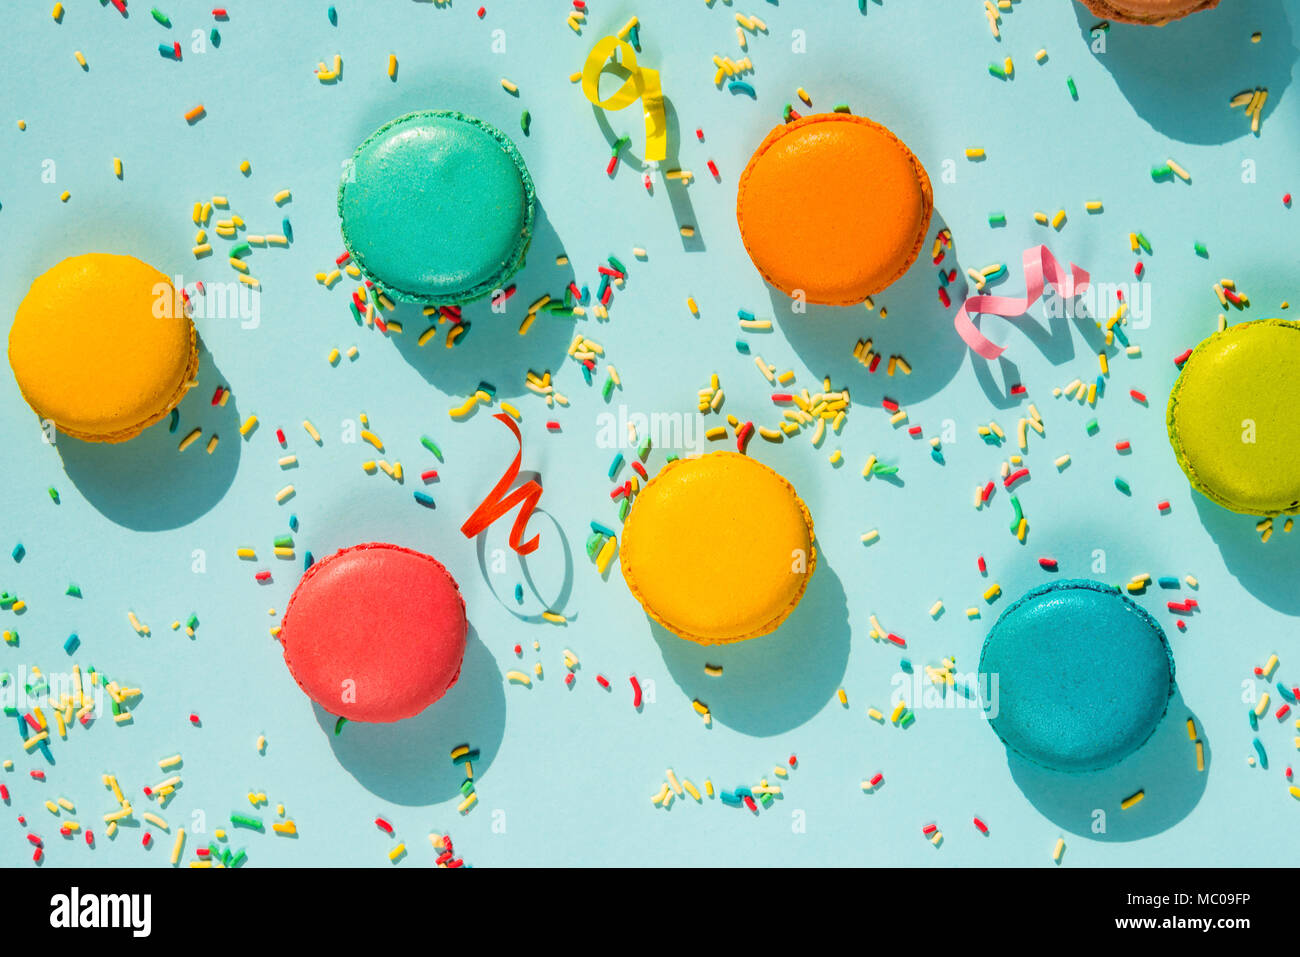 Top view of colorful macaroons, sugar sprinkles and party ribbons over blue background. Abstract party food background. Stock Photo